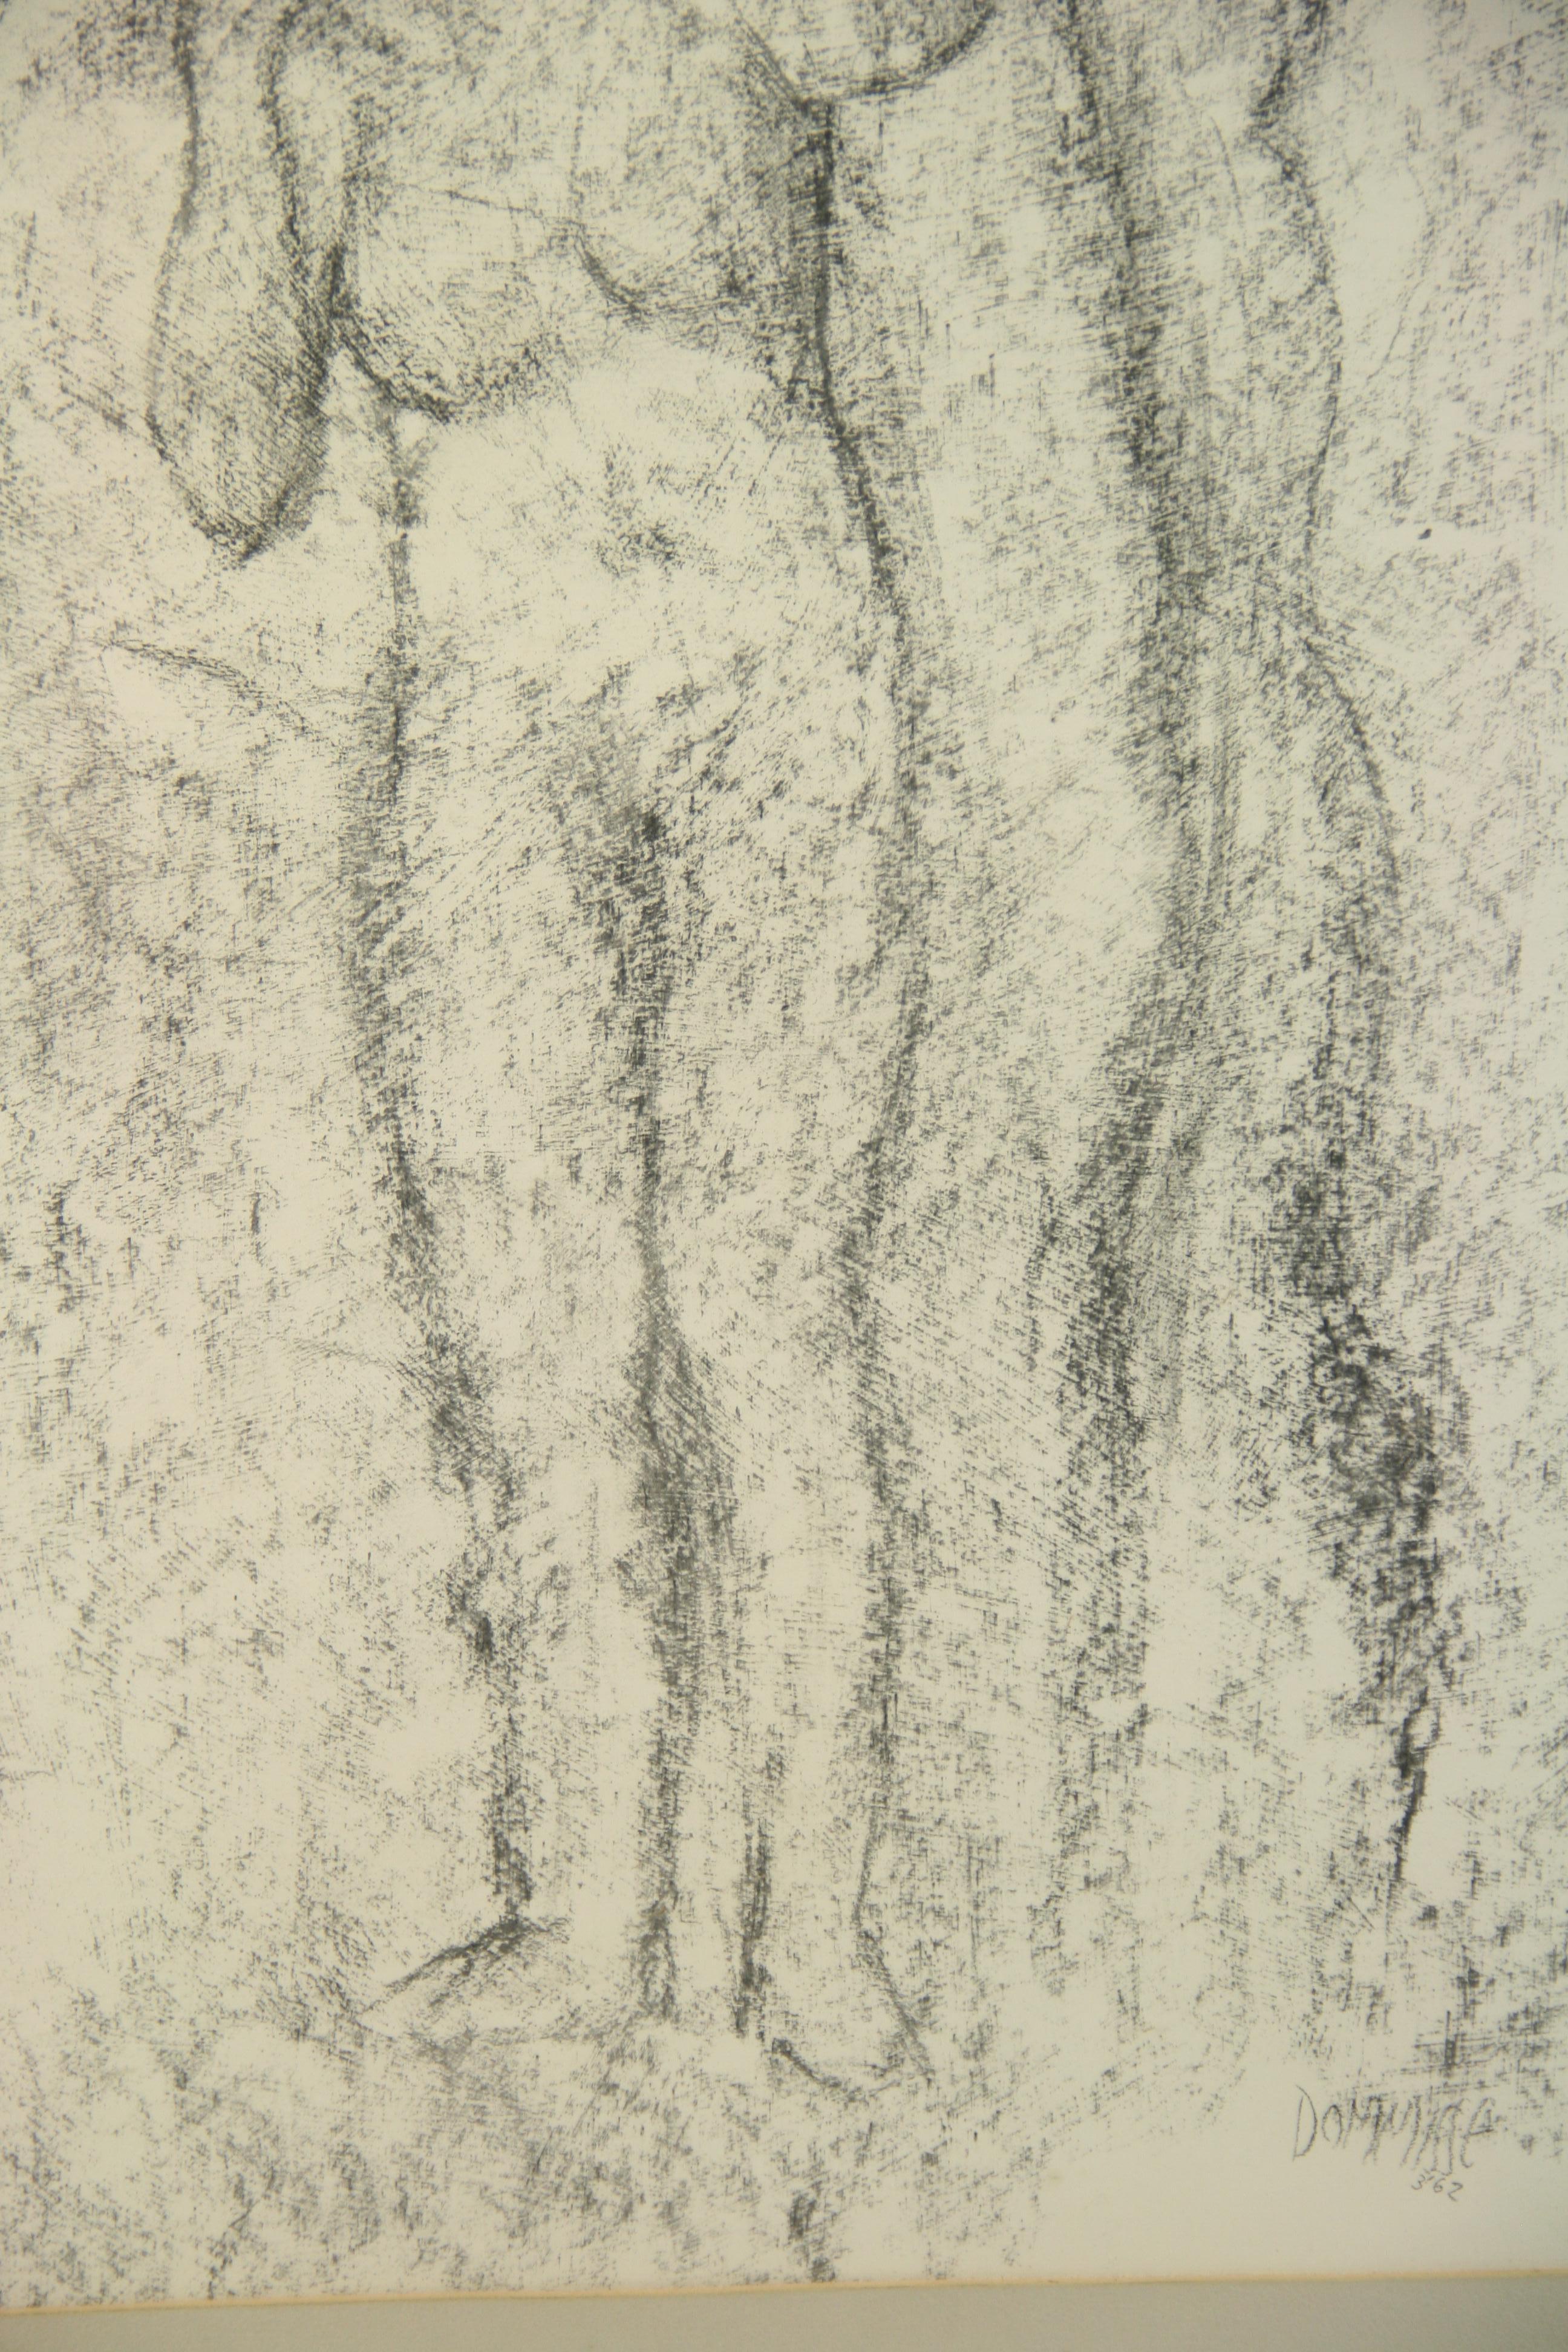 Mid-20th Century Charcoal Drawing Woman under the Tree by Dommisse